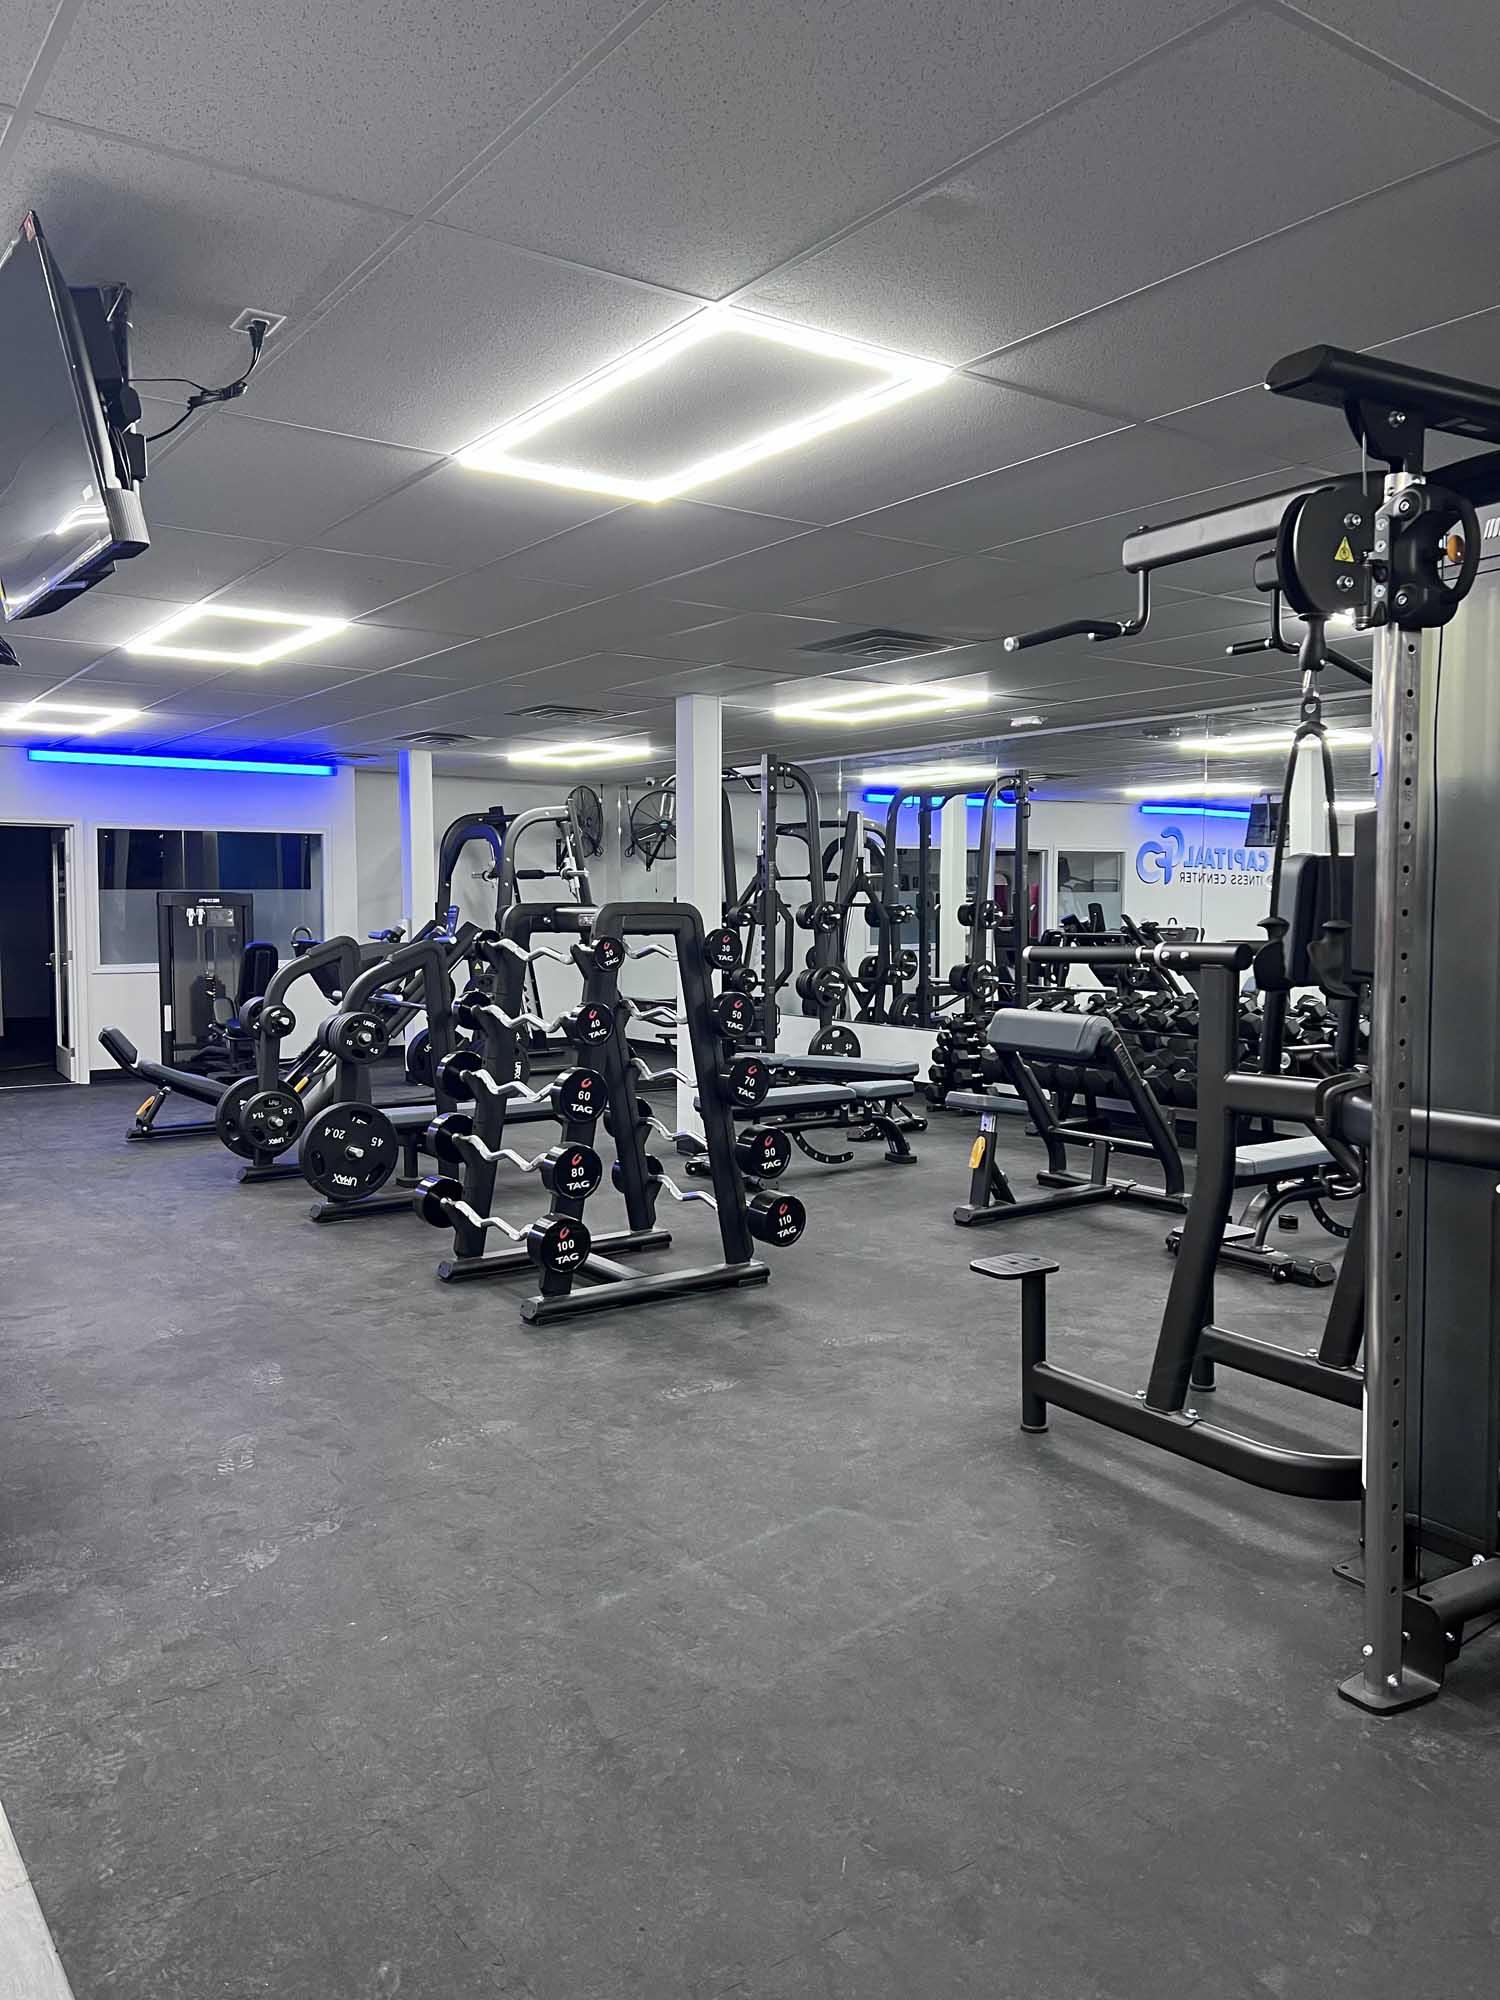 capital-fitness-24-hr-gym-concord-nh (12)